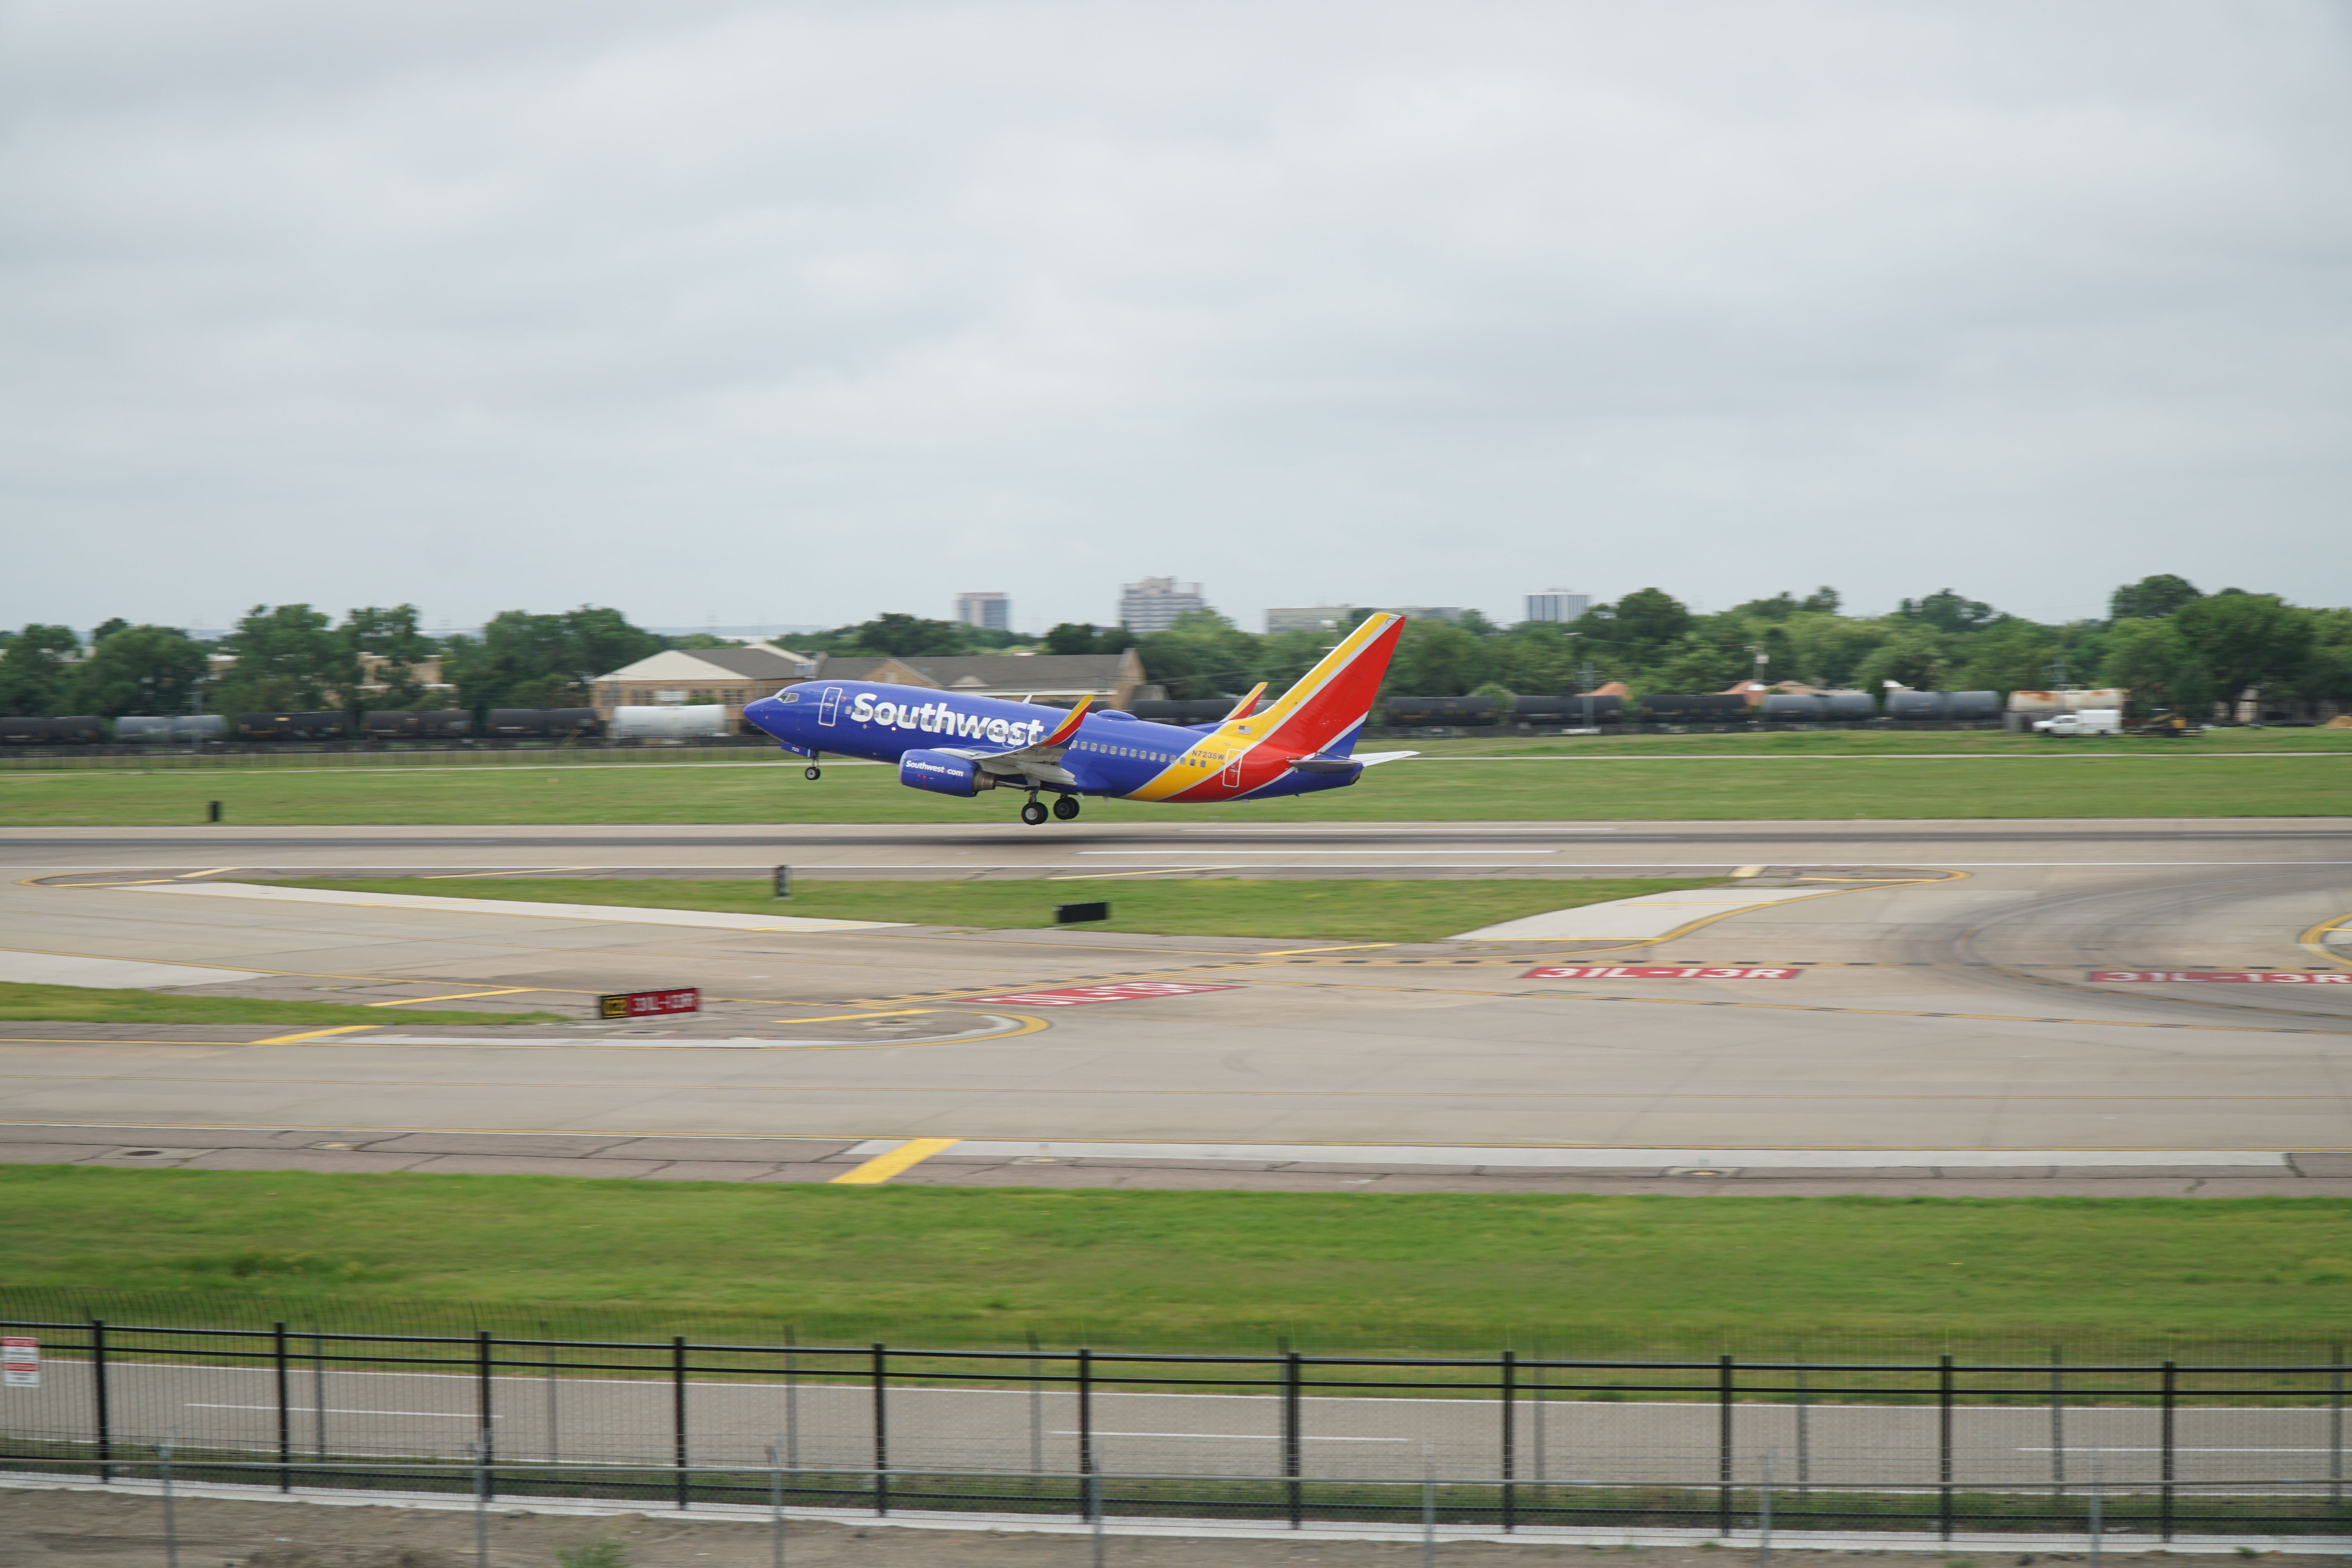 A Southwest Airlines aircraft taking off from Dallas Love Field.